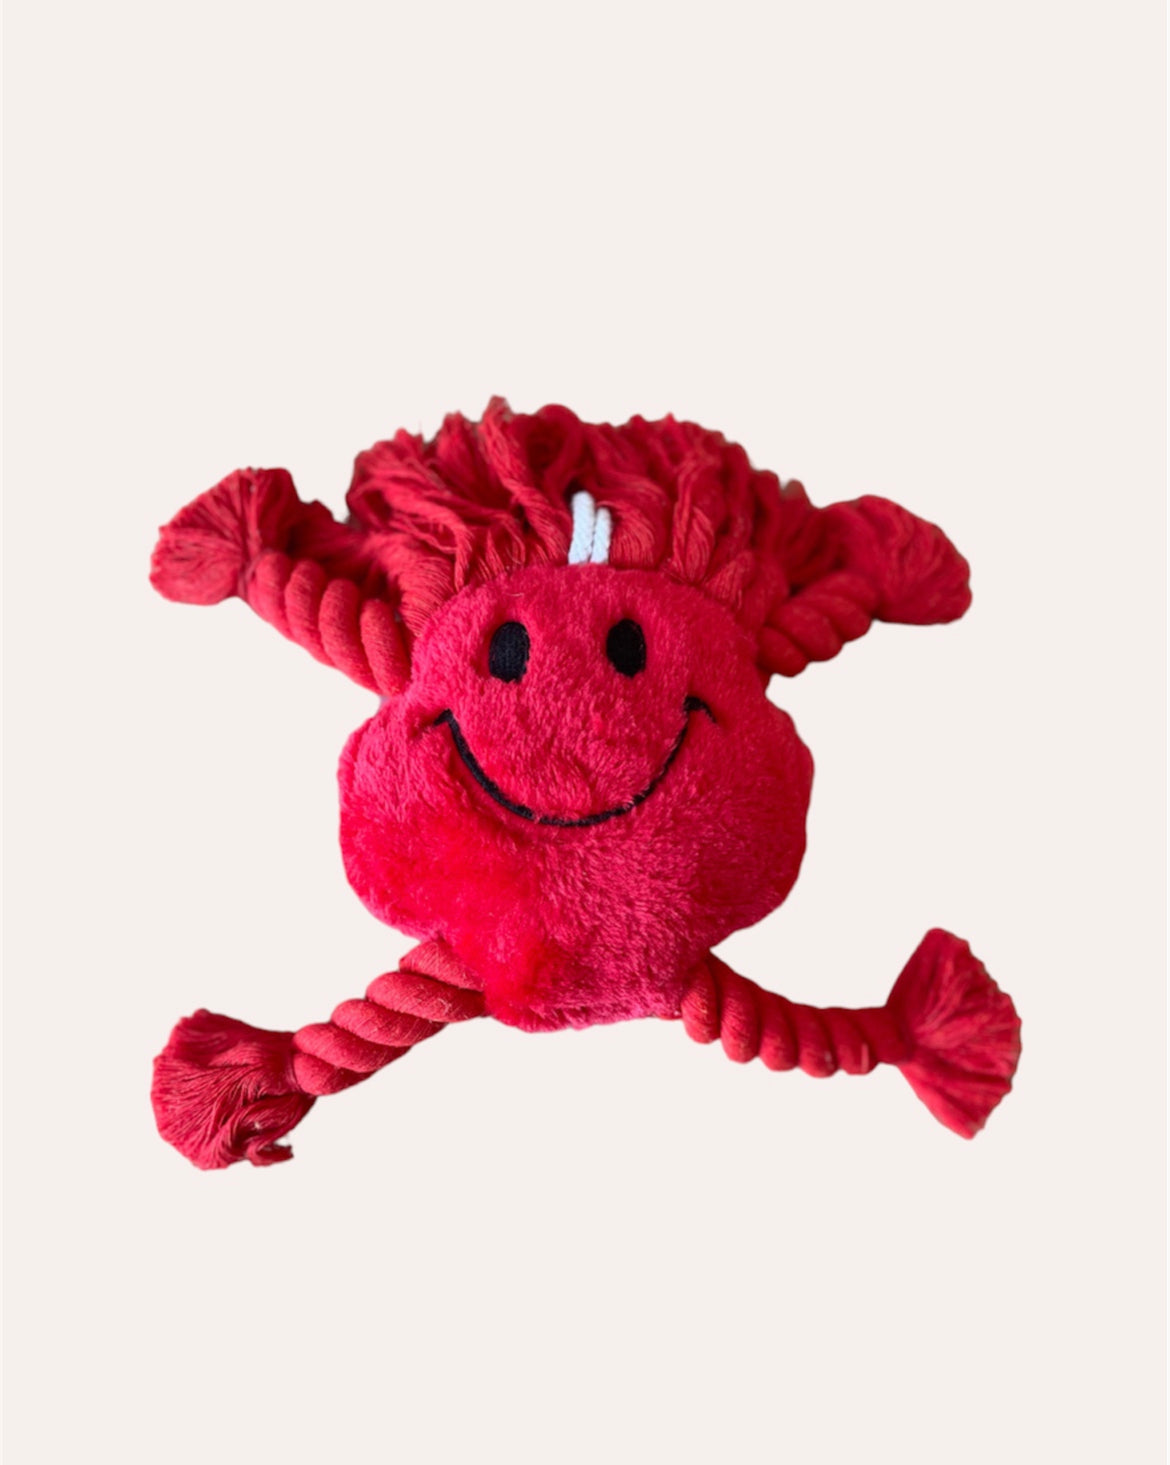 Red smiley with. rope and pole - dog toy